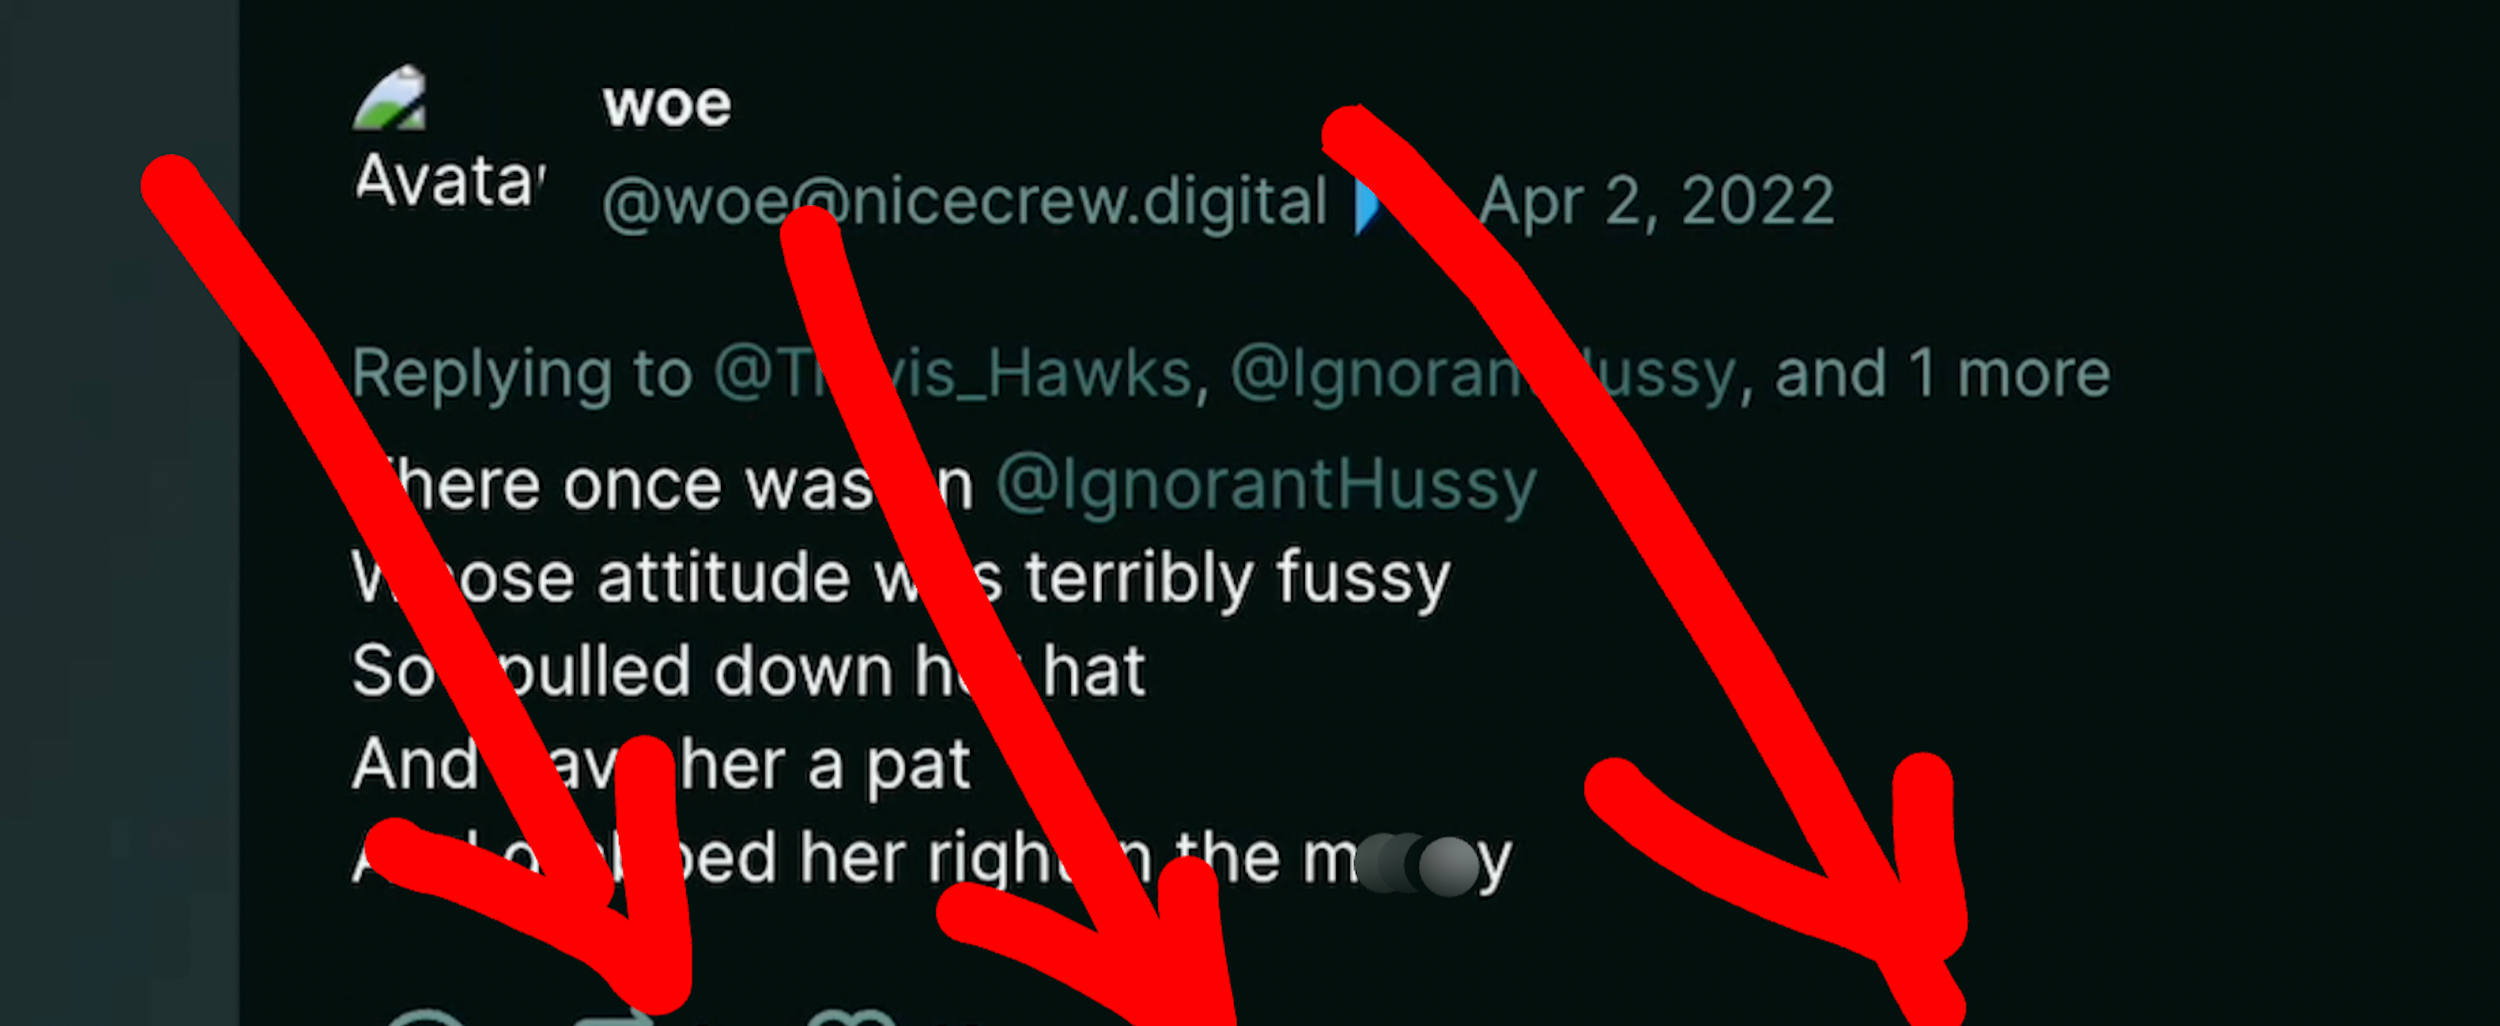 TW: rape, sexual assault. Dumperth on Poast: "There once was an @IgnorantHussy/Whose attitude was terribly fussy/So I pulled down her hat/And gave her a pat/And grabbed her right on the mussy."